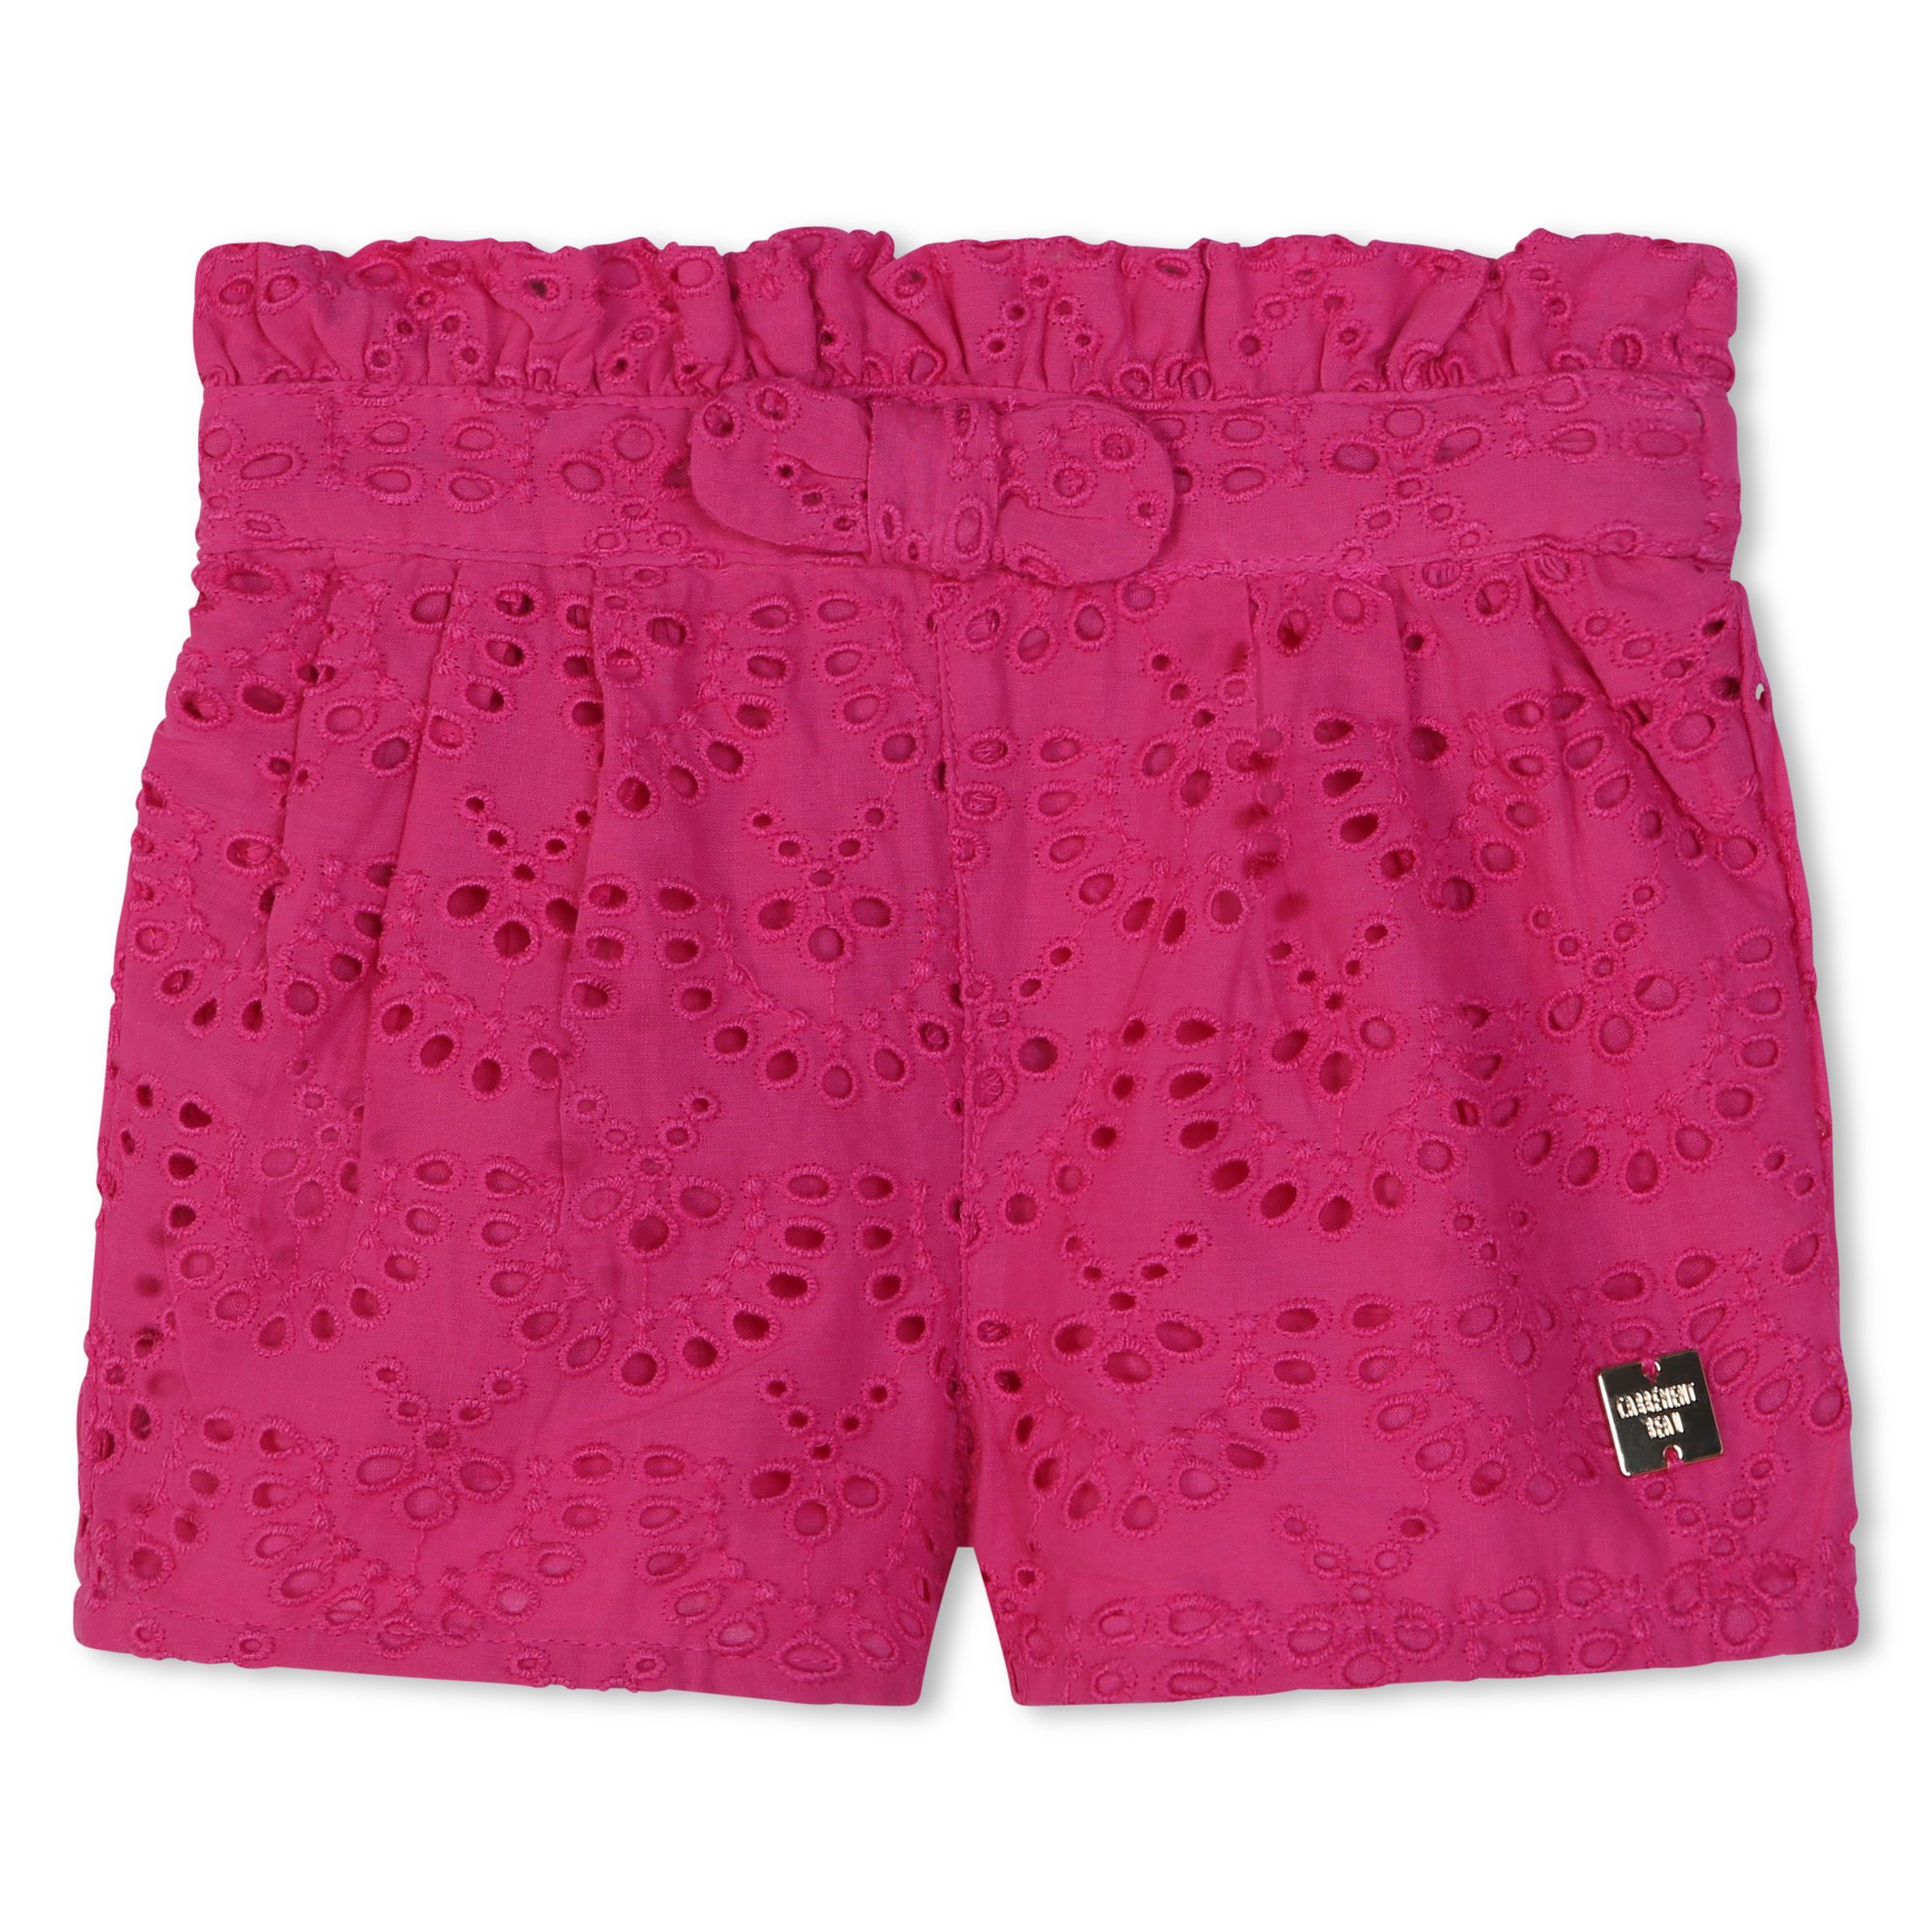 Formal cotton shorts CARREMENT BEAU for GIRL